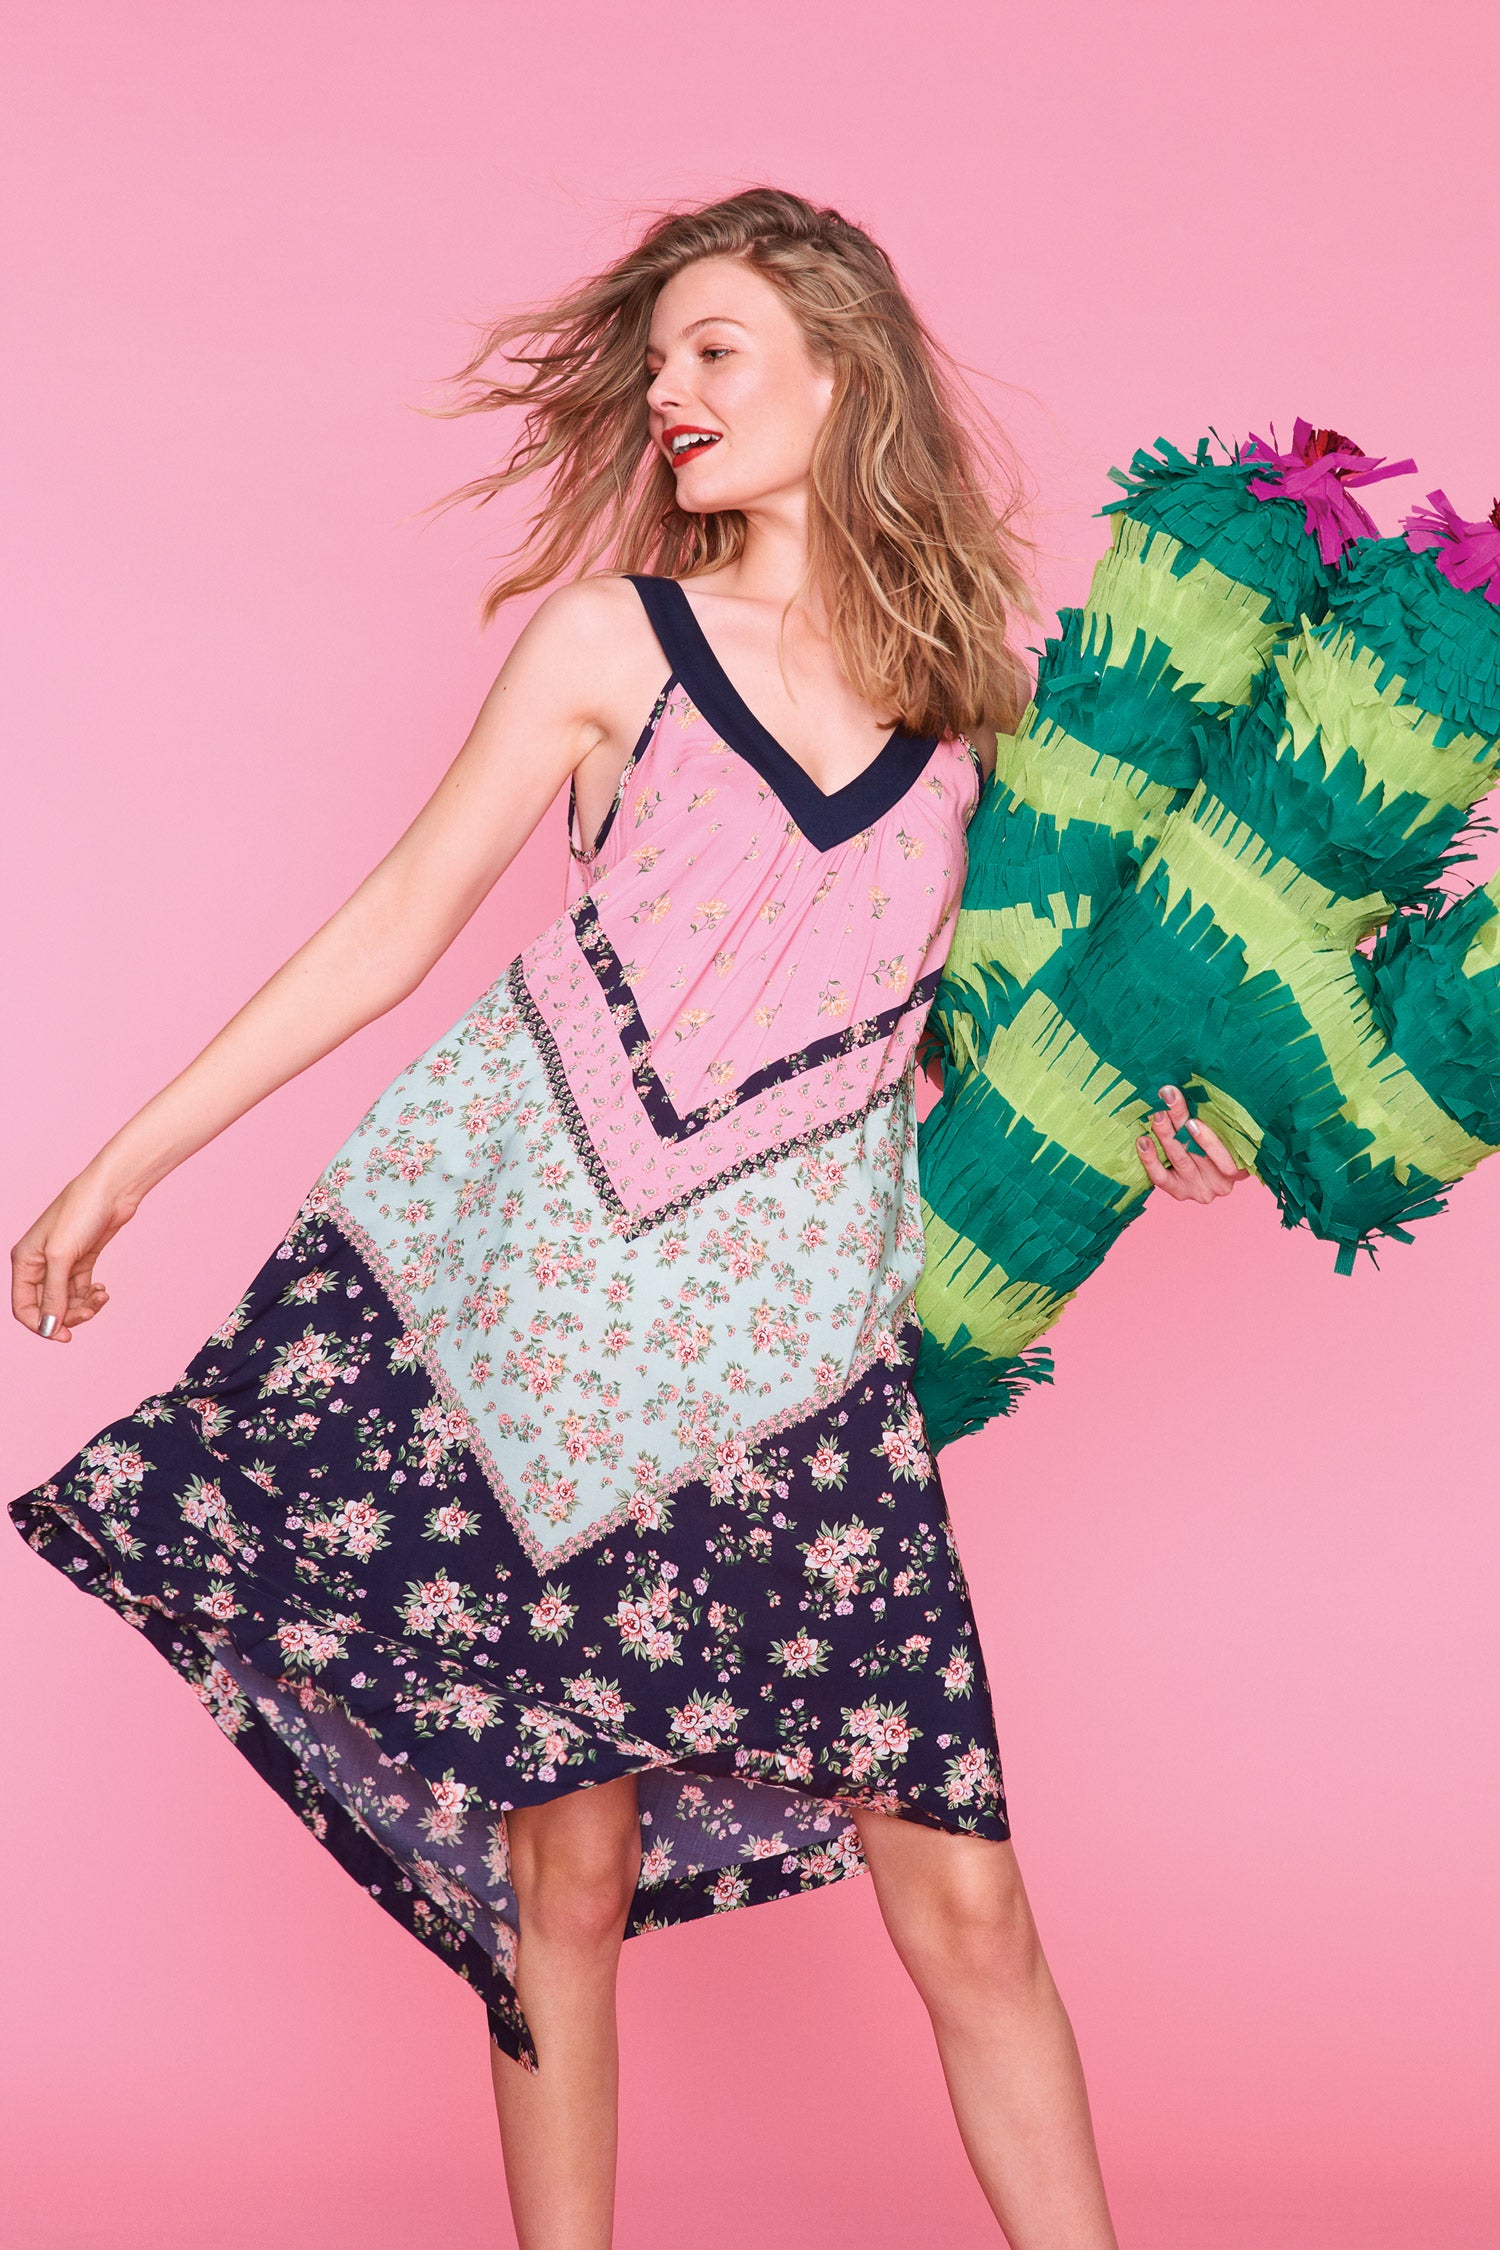 A woman in a colourful nightdress poses against a pink background with a giant, handmade, green cactus piñata.